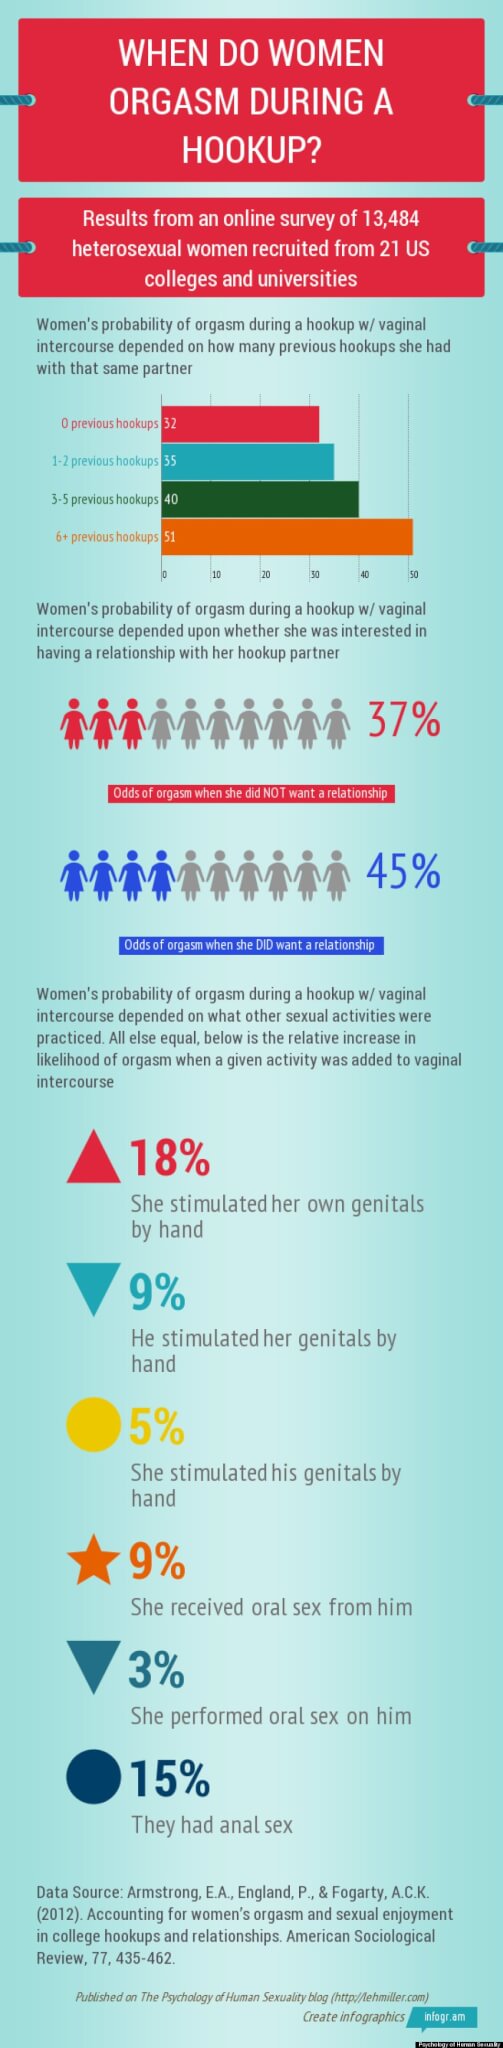 Infographic: When do Women Orgasm during a Hookup?